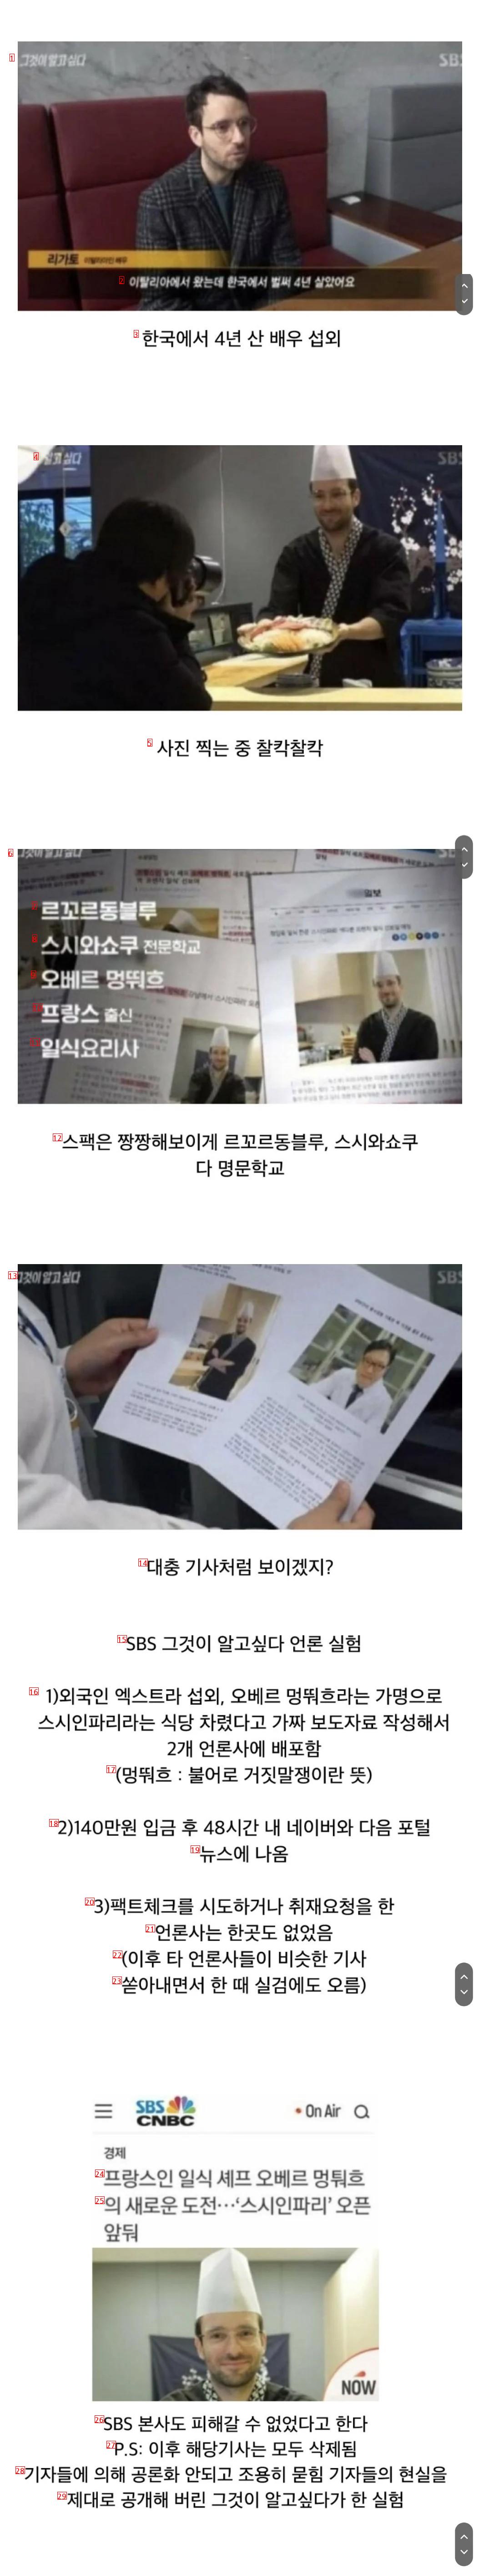 An Experiment Revealing the Reality of Korean Journalists